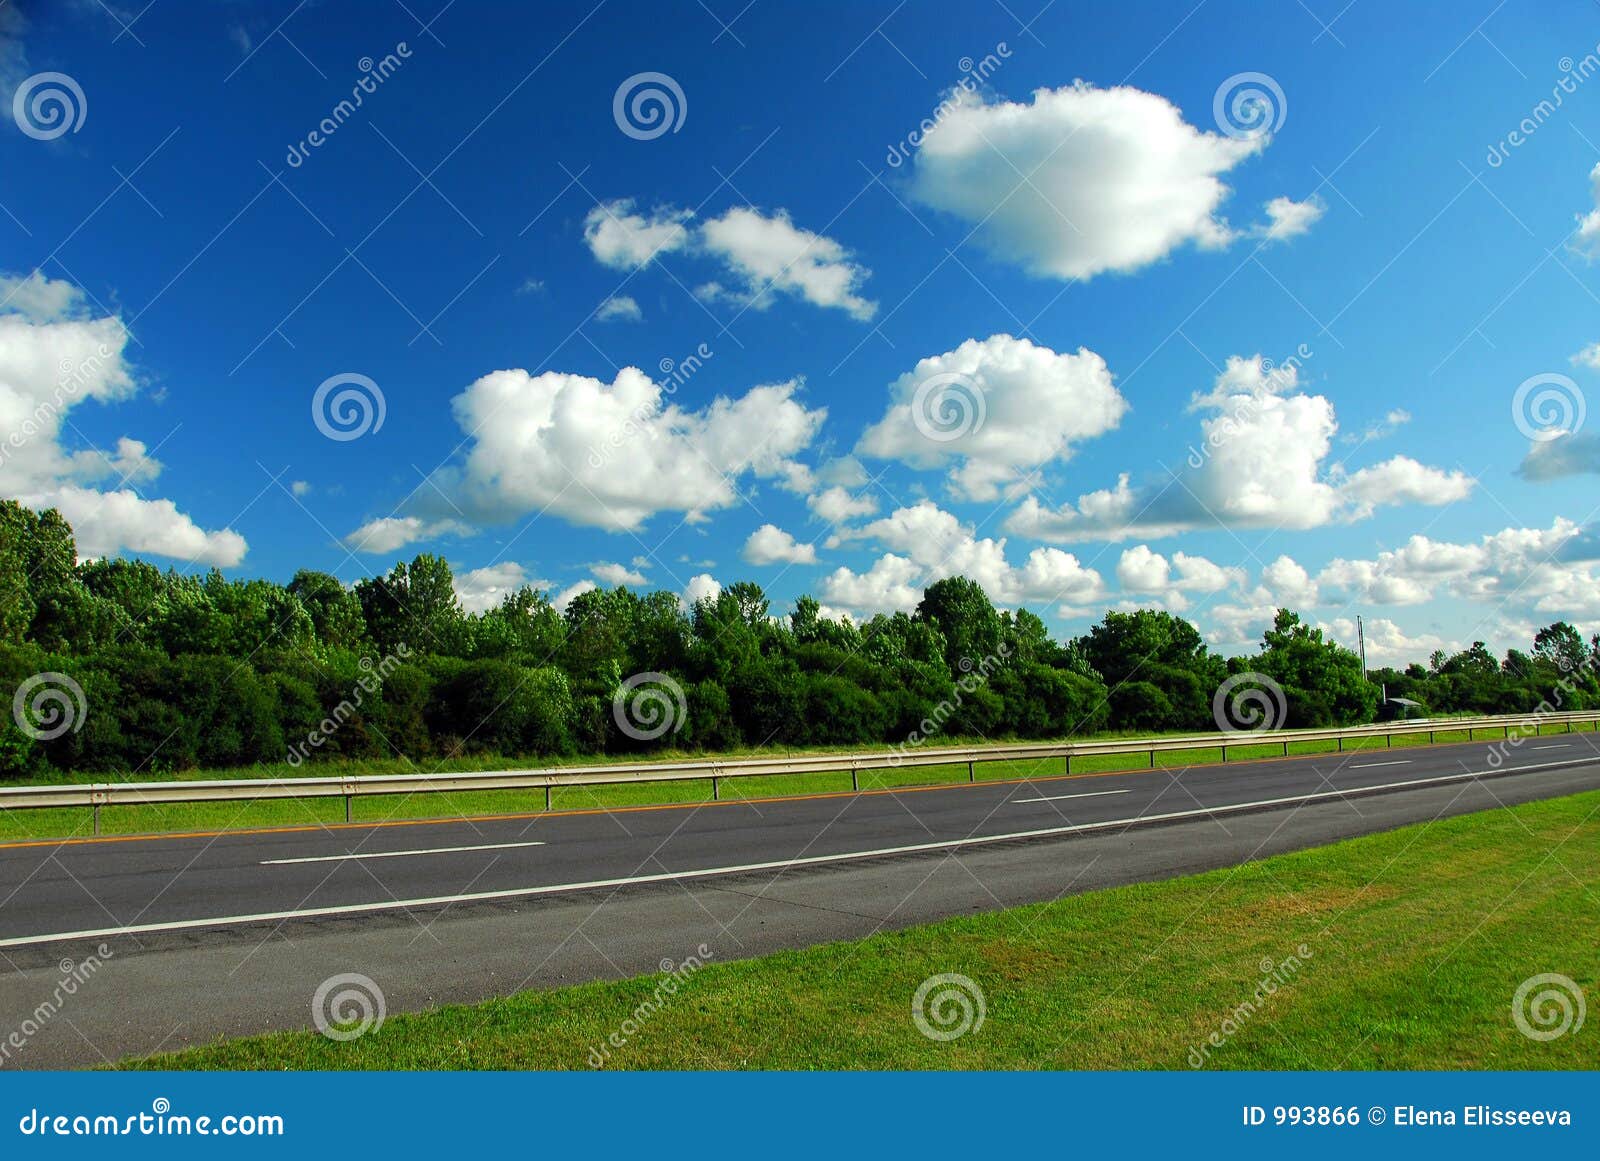 Road and blue sky stock photo. Image of interstate, landscape - 993866